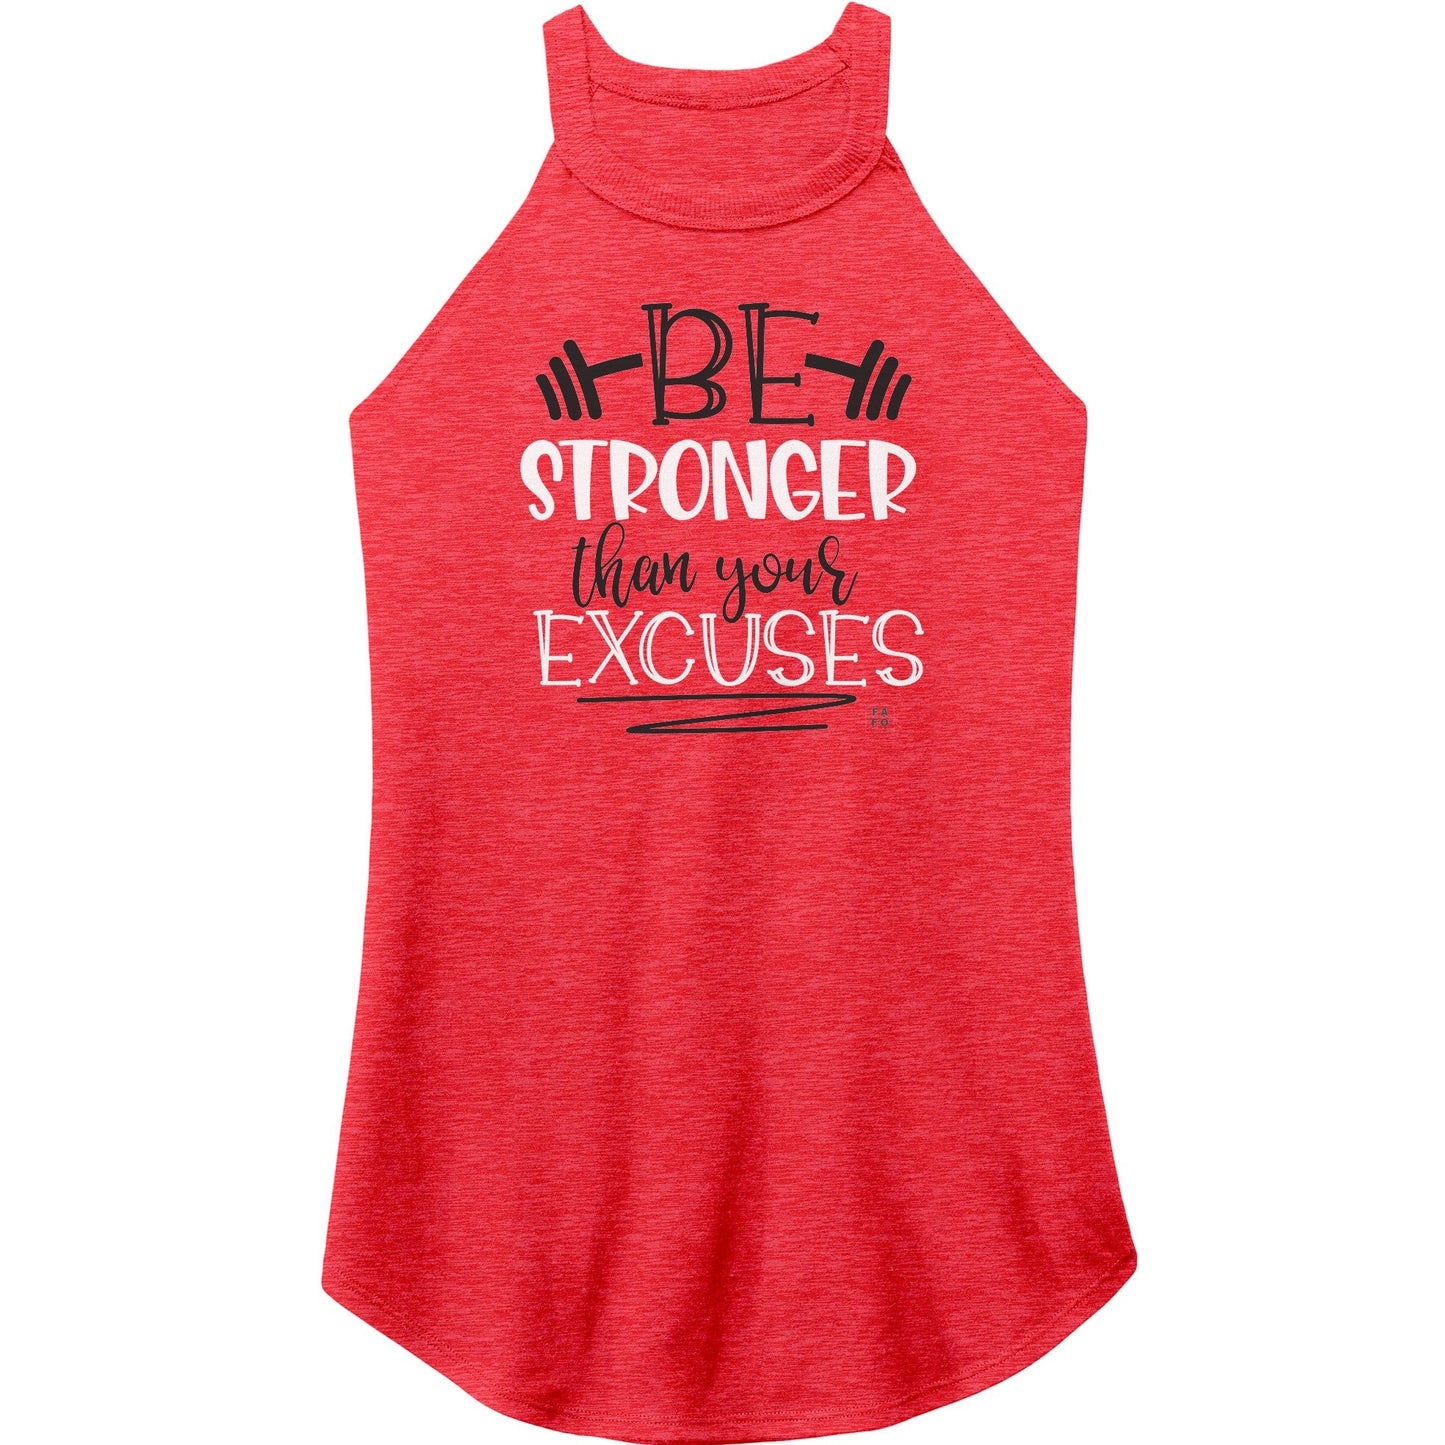 Rocker Tank - Be Stronger Than Your Excuses - FAFO Sportswear